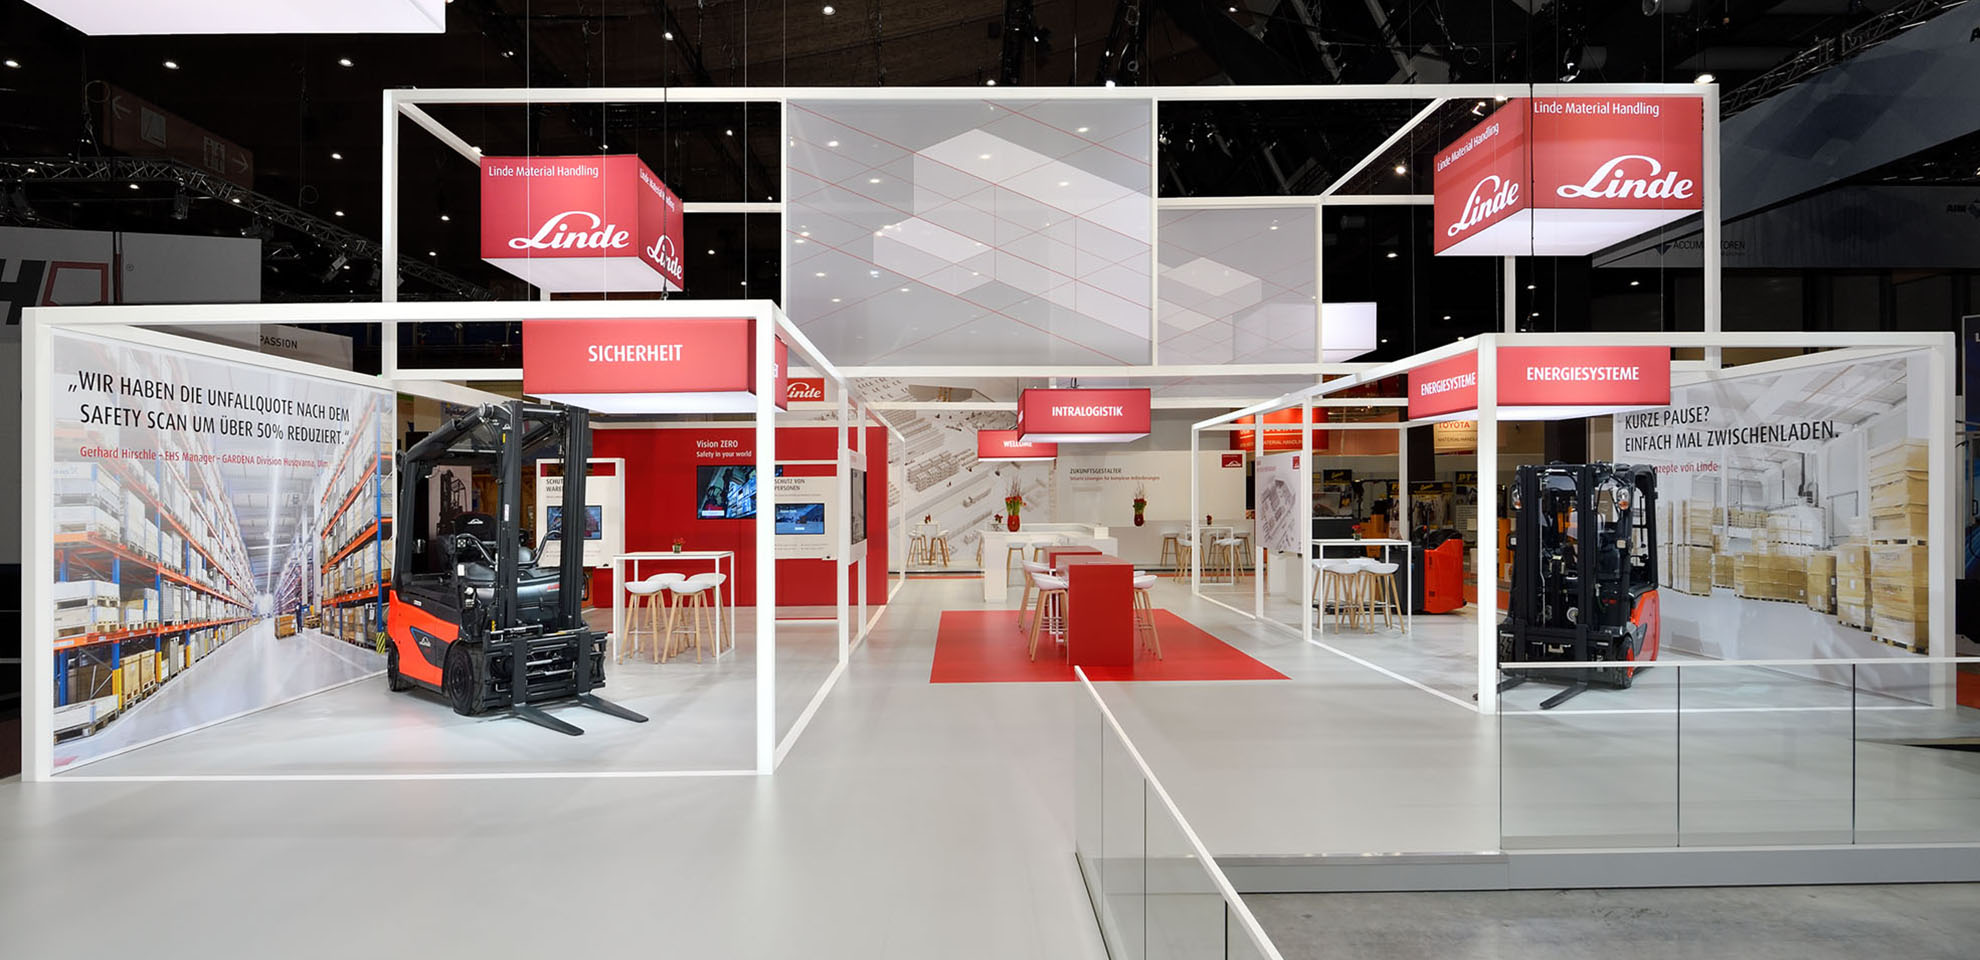 Exhibition Stand for Linde from the industry sector at the Logimat in Stuttgart